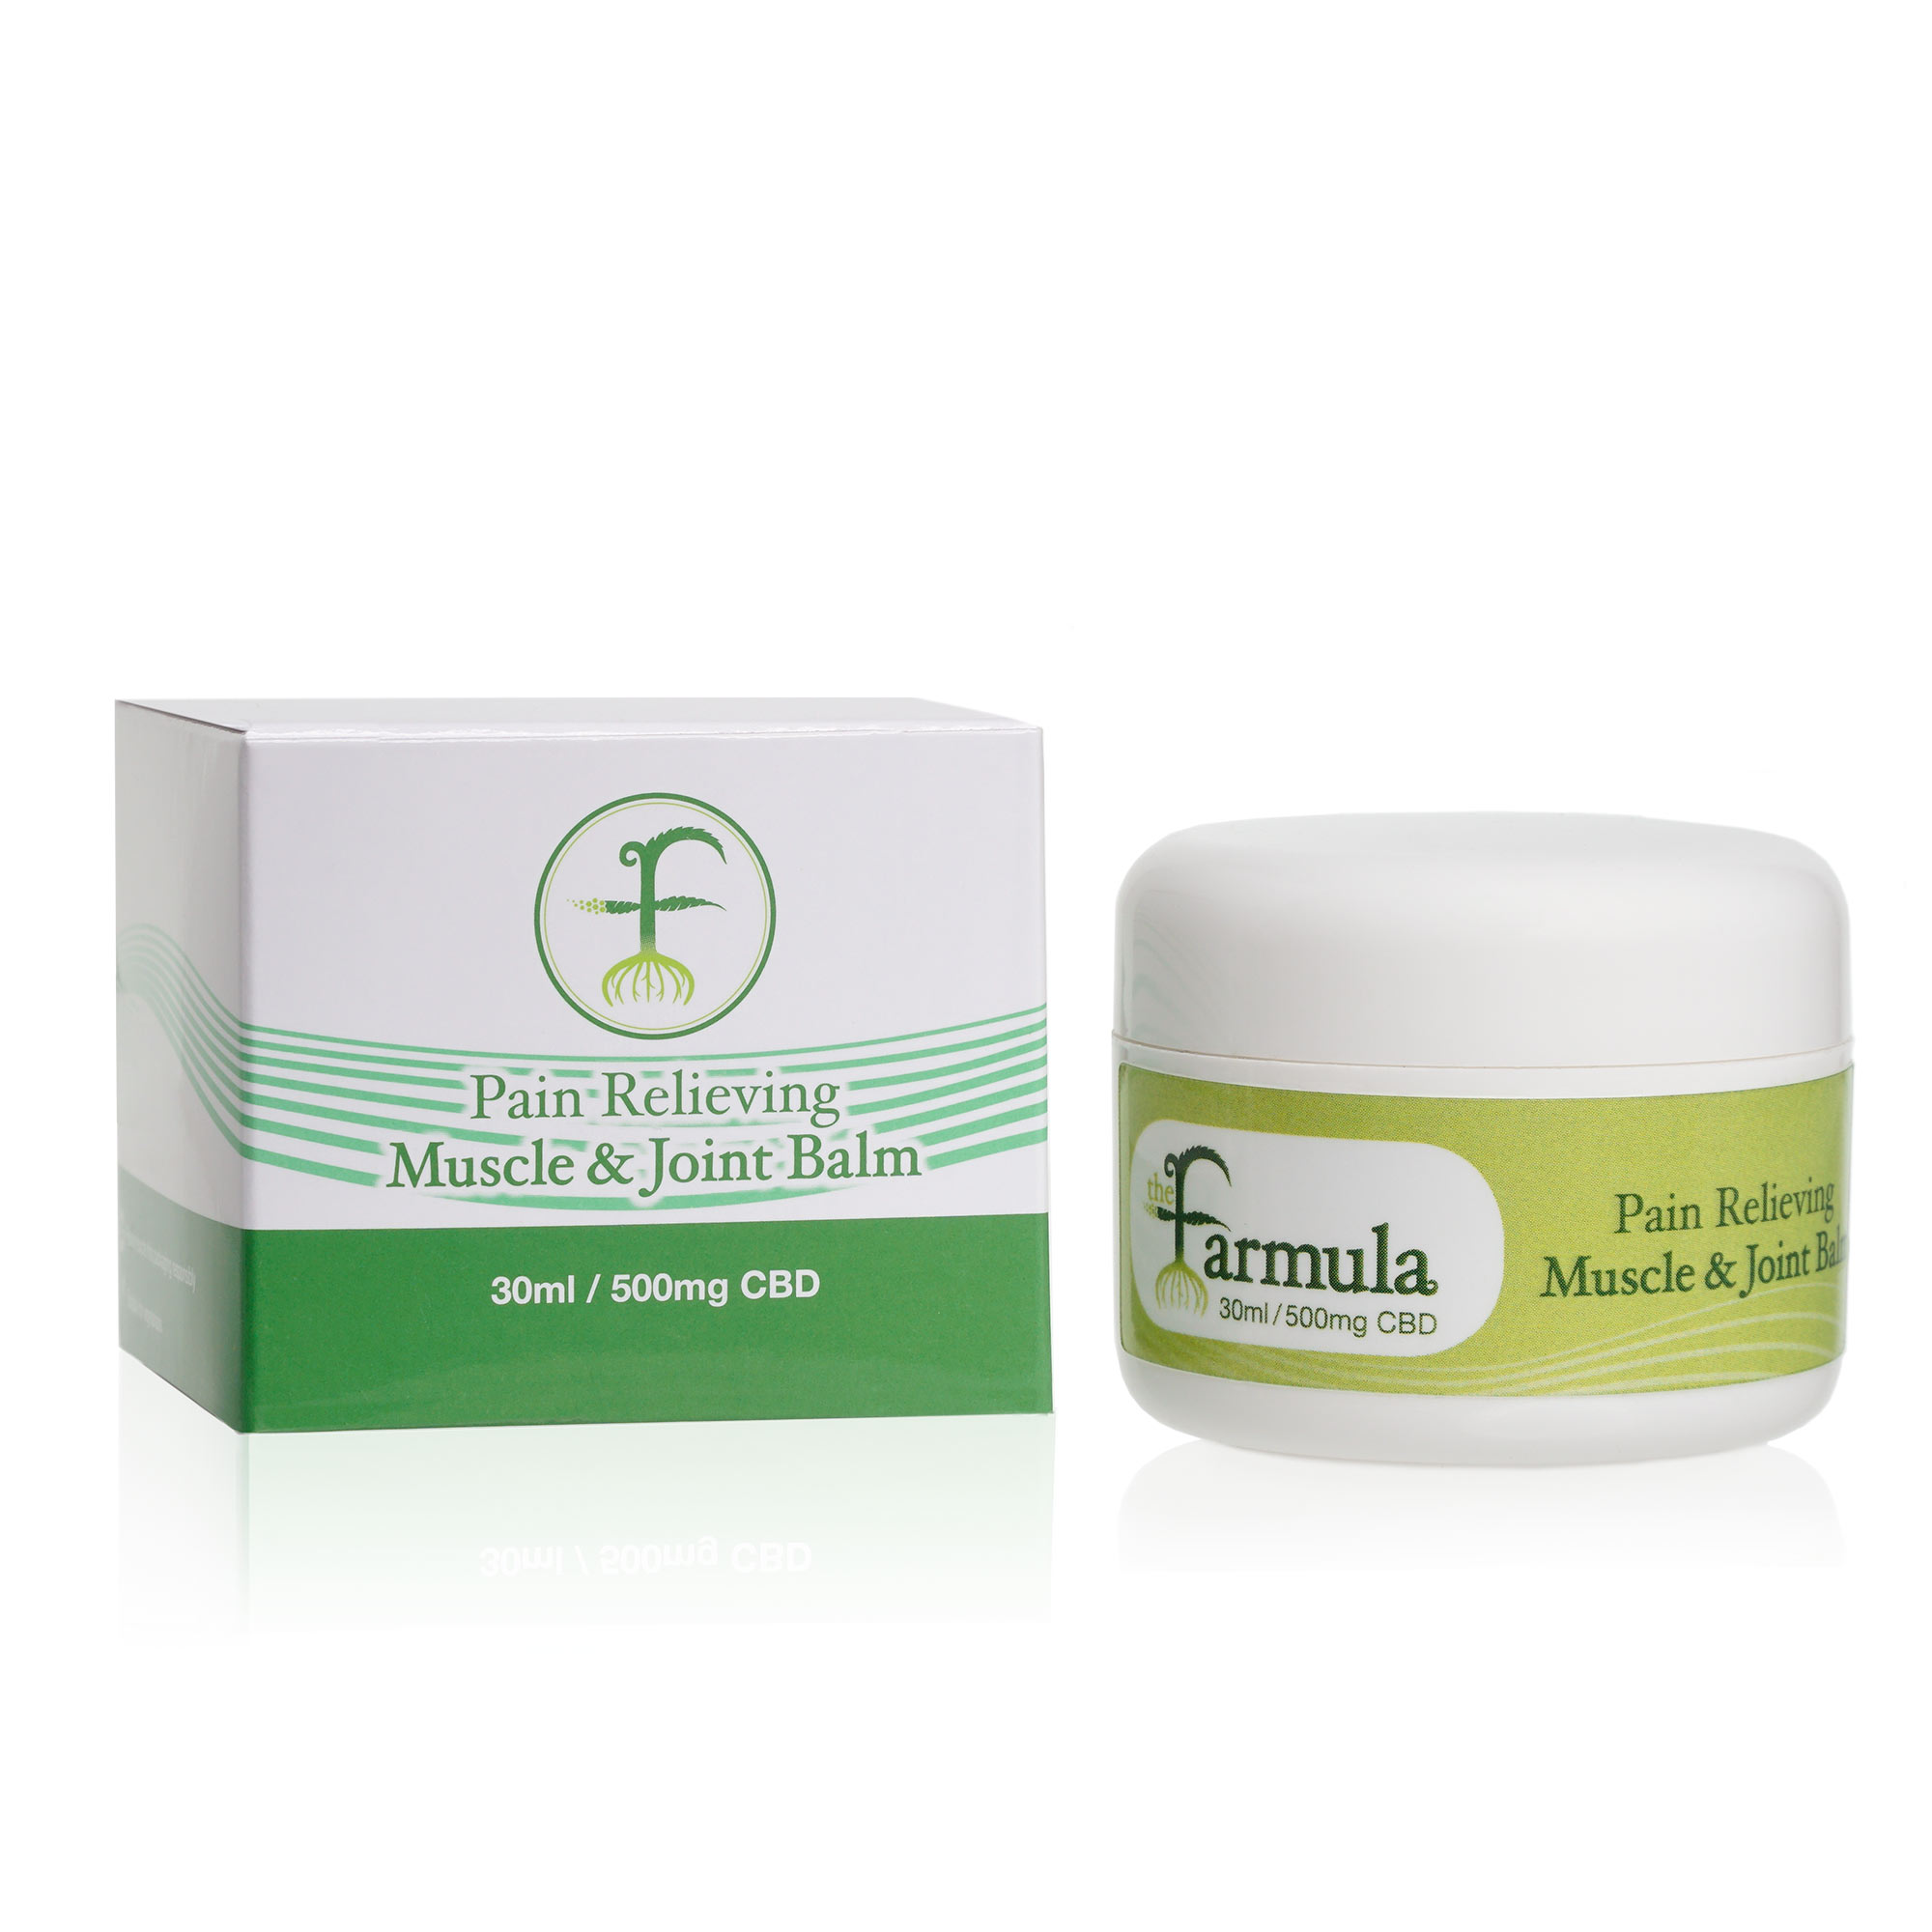 MUSCLE & JOINT BALM